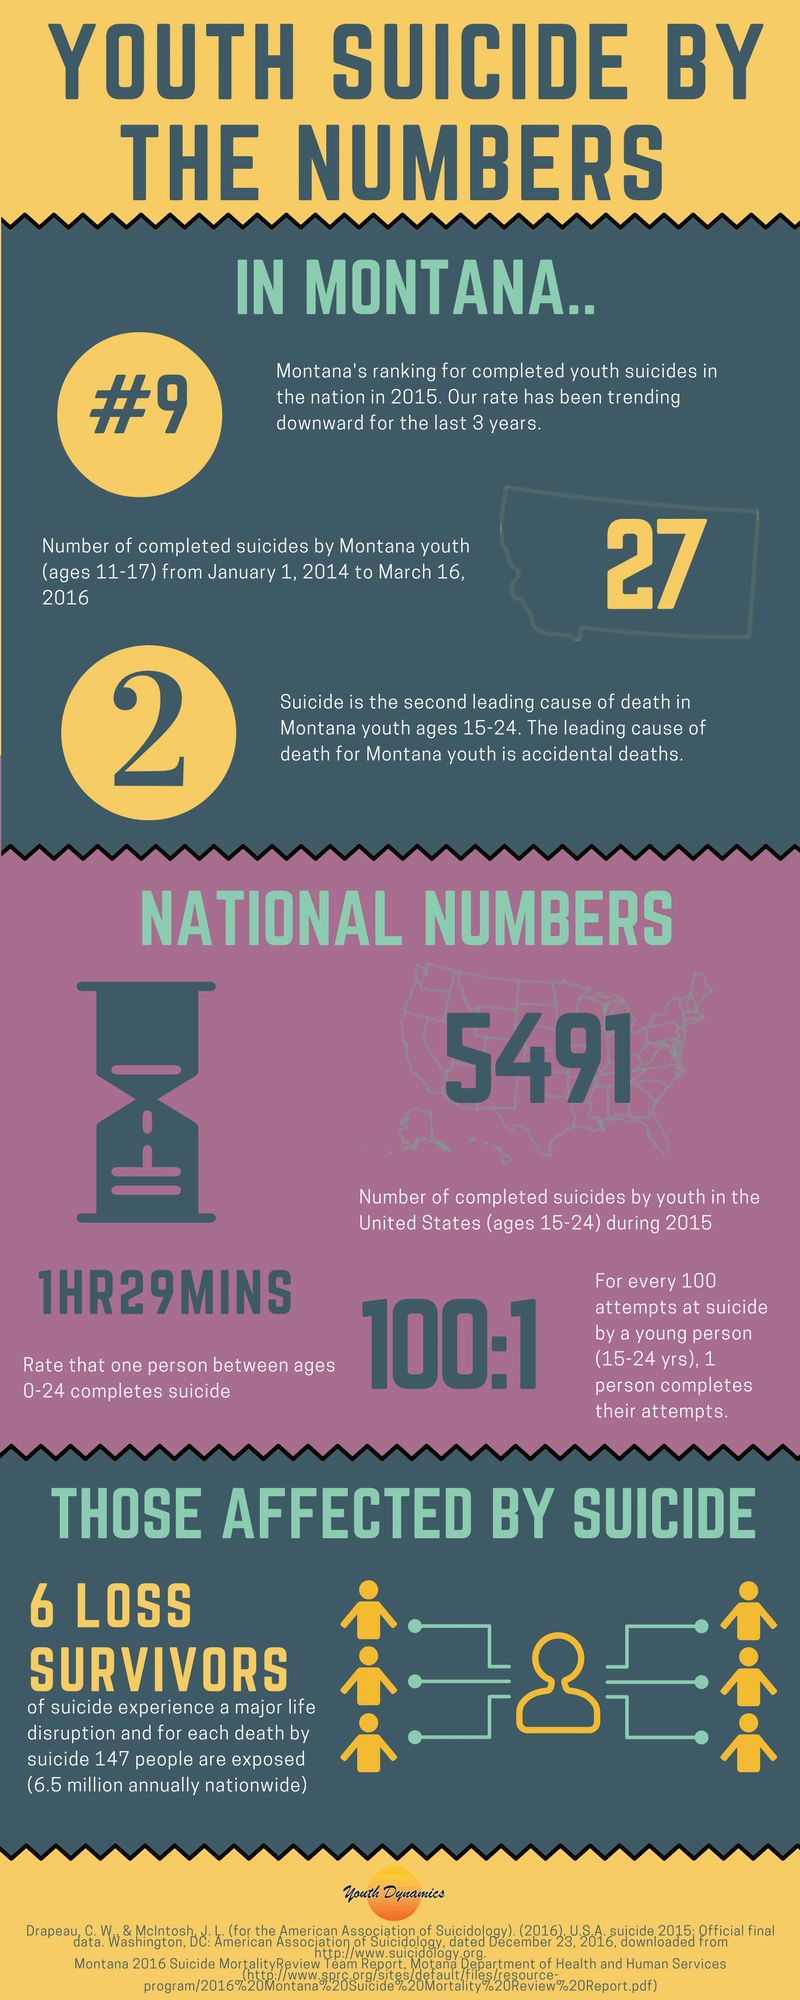 The Importanceof literacy 2 - [Infographic] Montana Youth Suicide by the Numbers